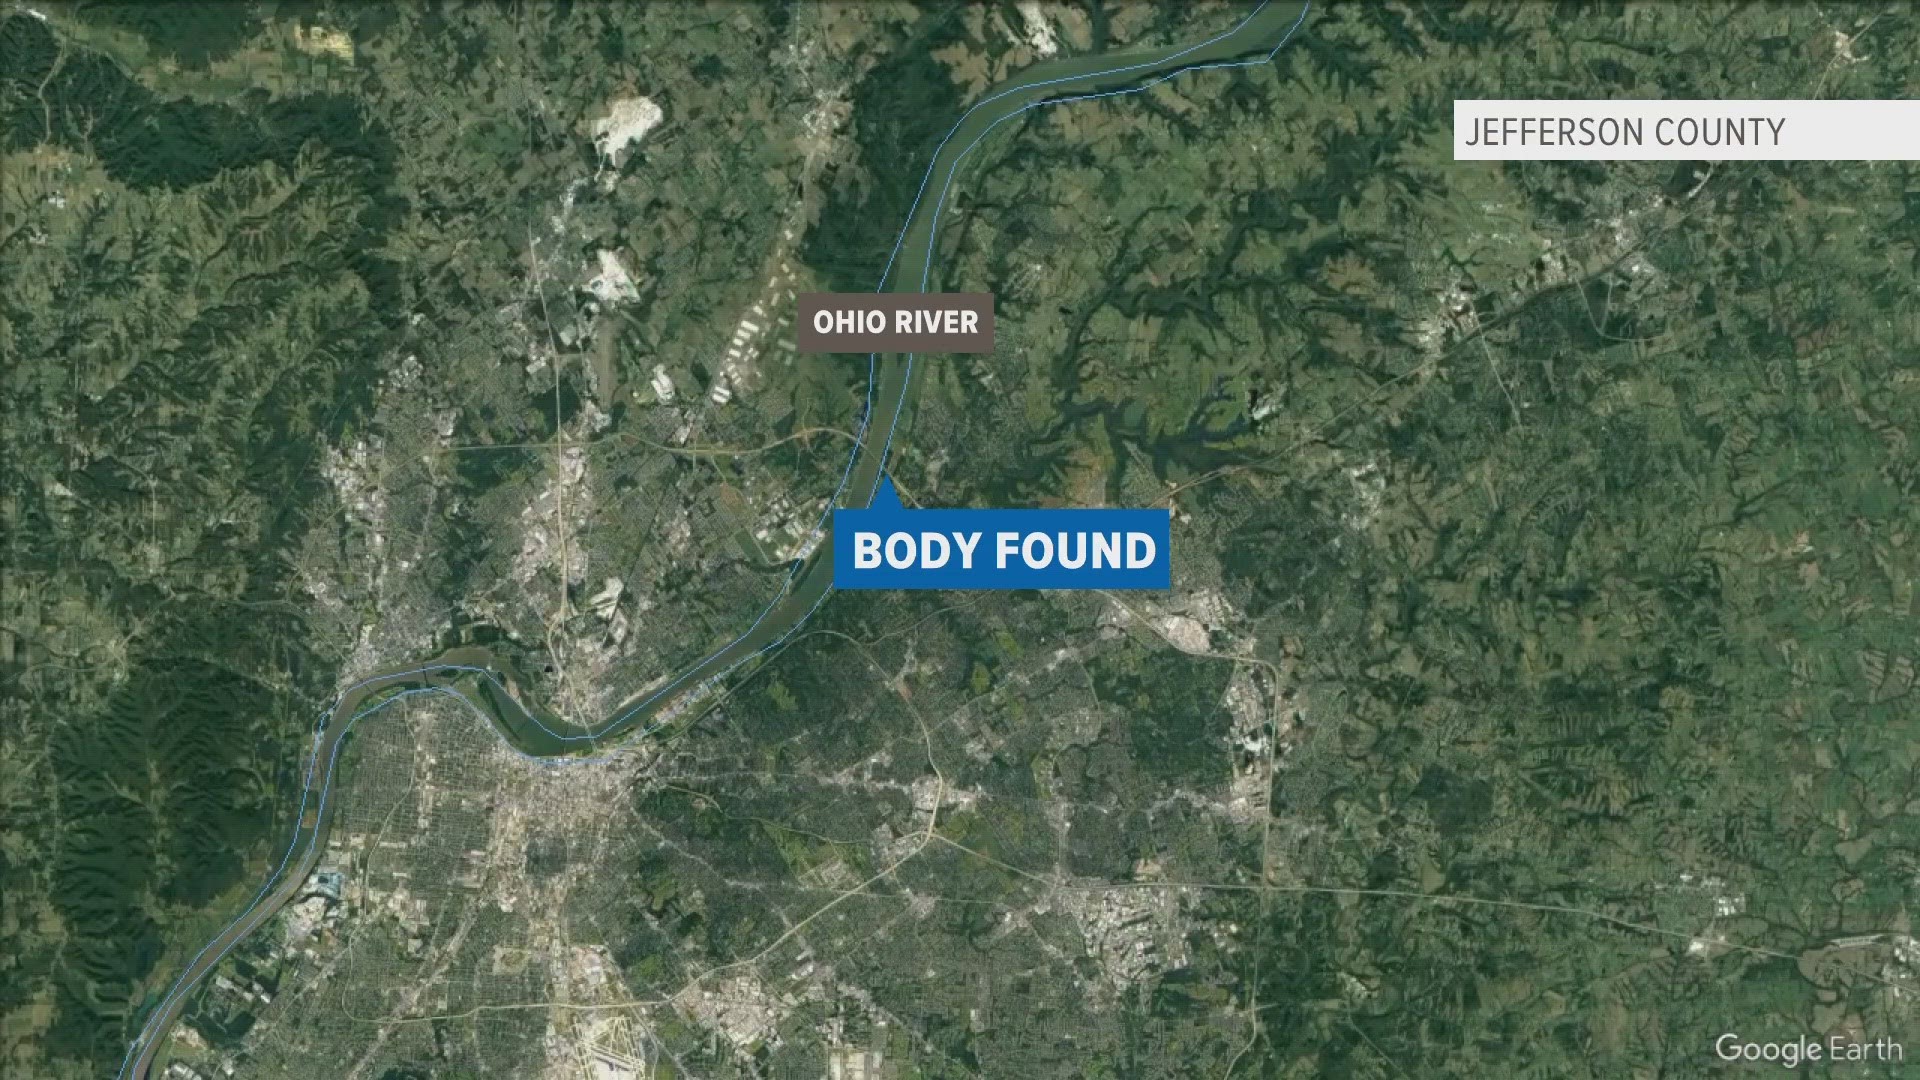 A man called police on Tuesday night, saying he found a body in the Ohio River in east Louisville.